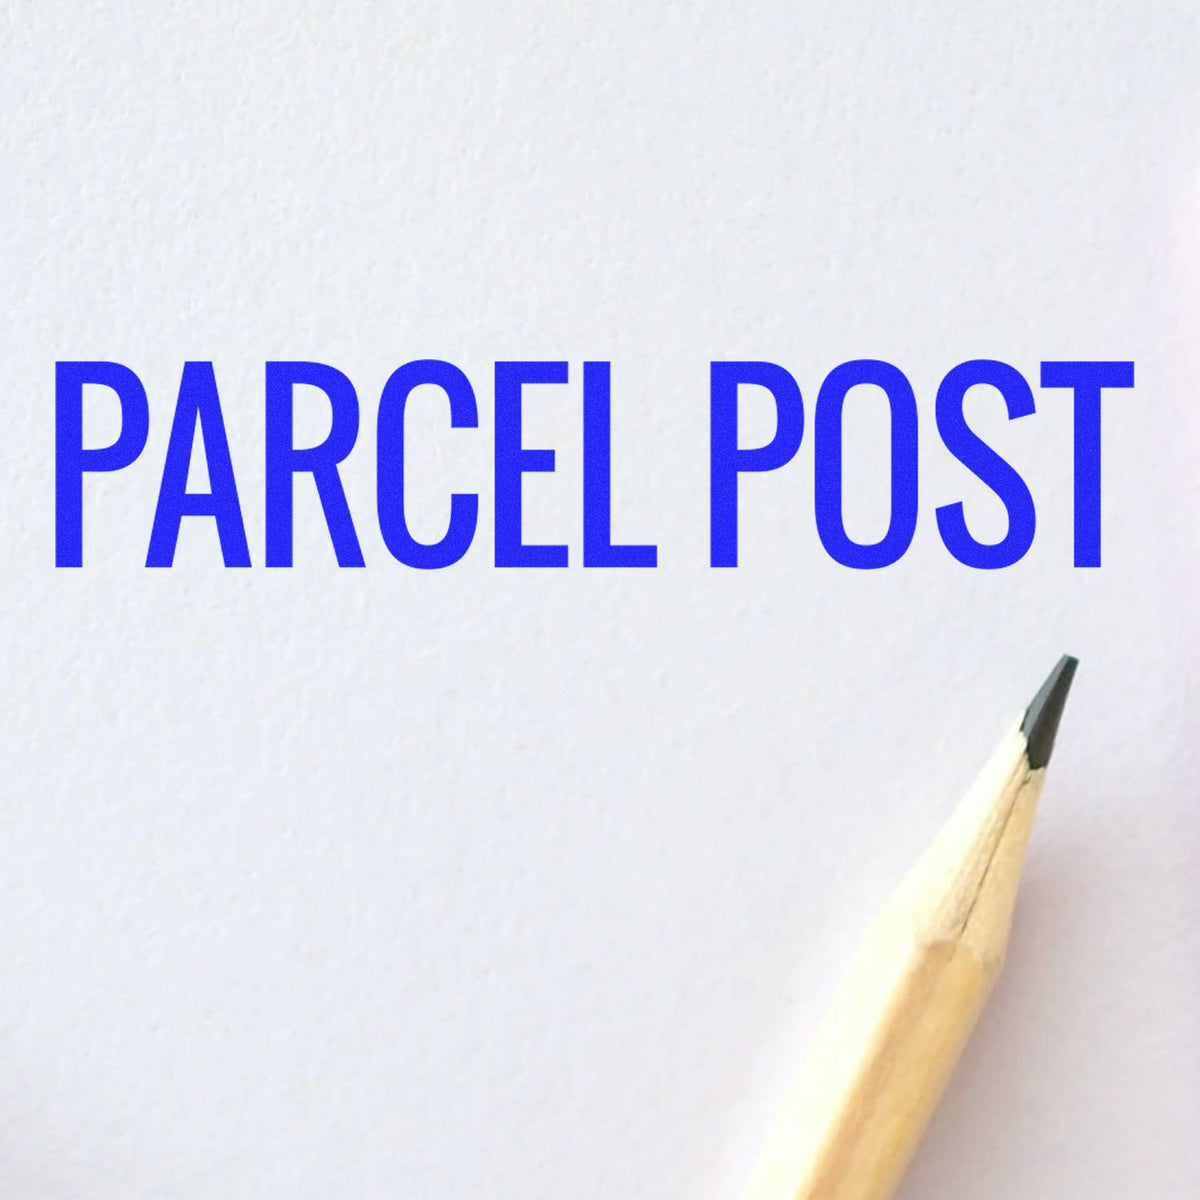 Large Parcel Post Rubber Stamp In Use Photo